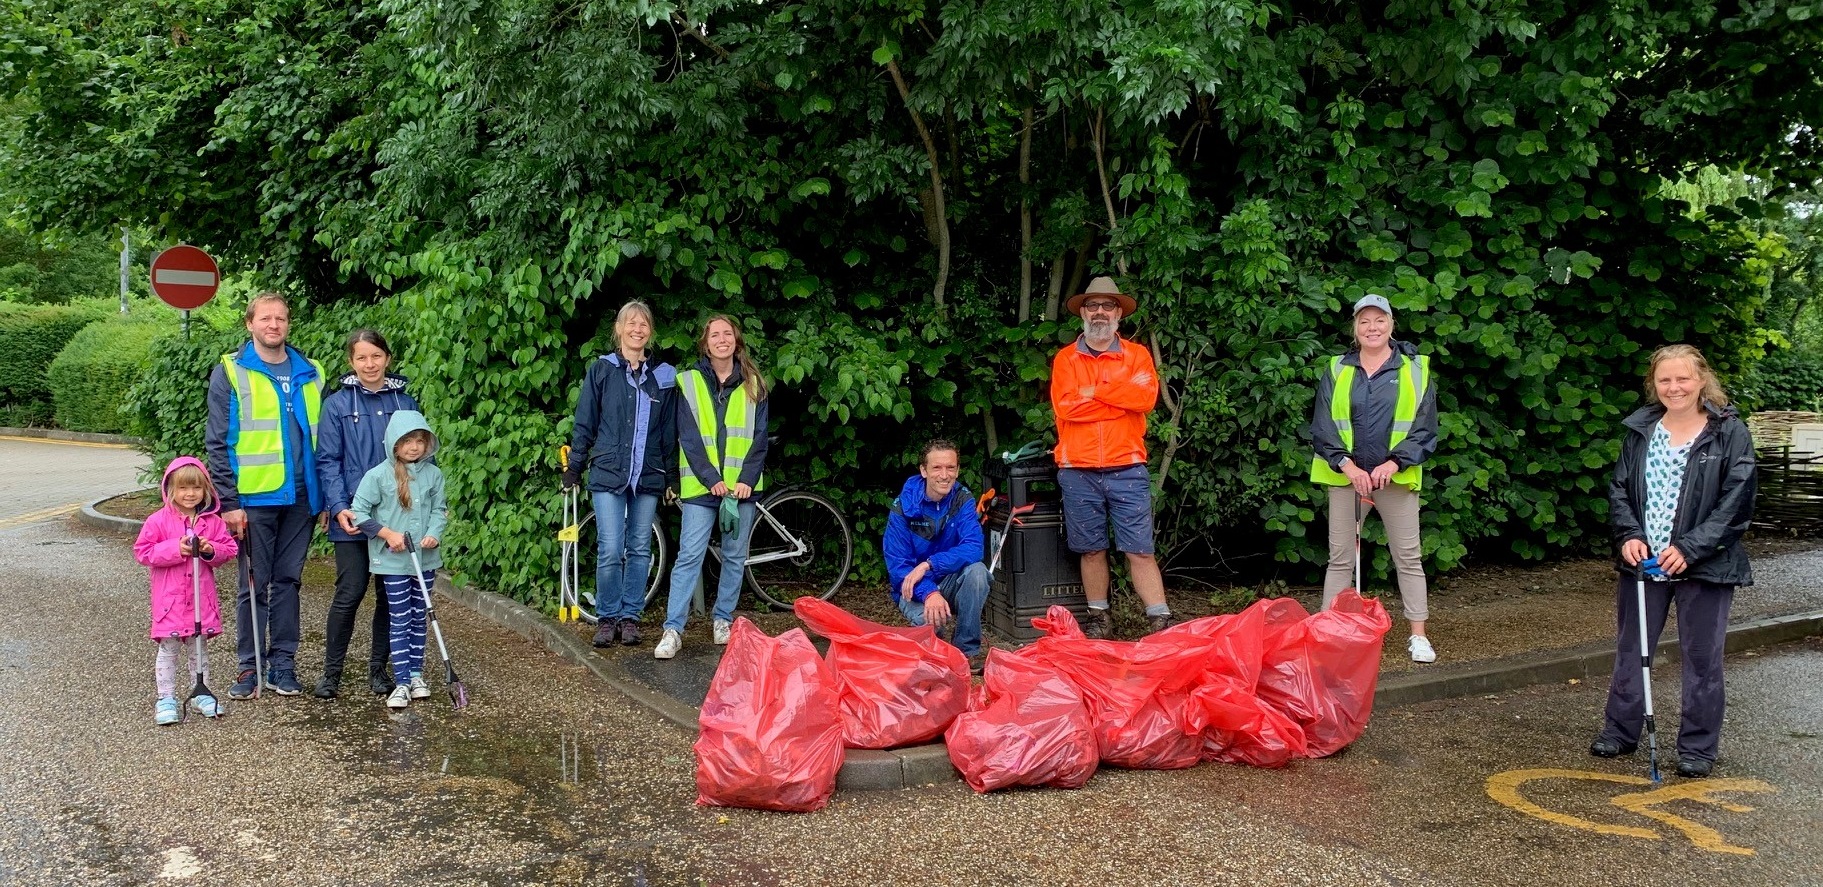 Litter pickers at Swam Meadow